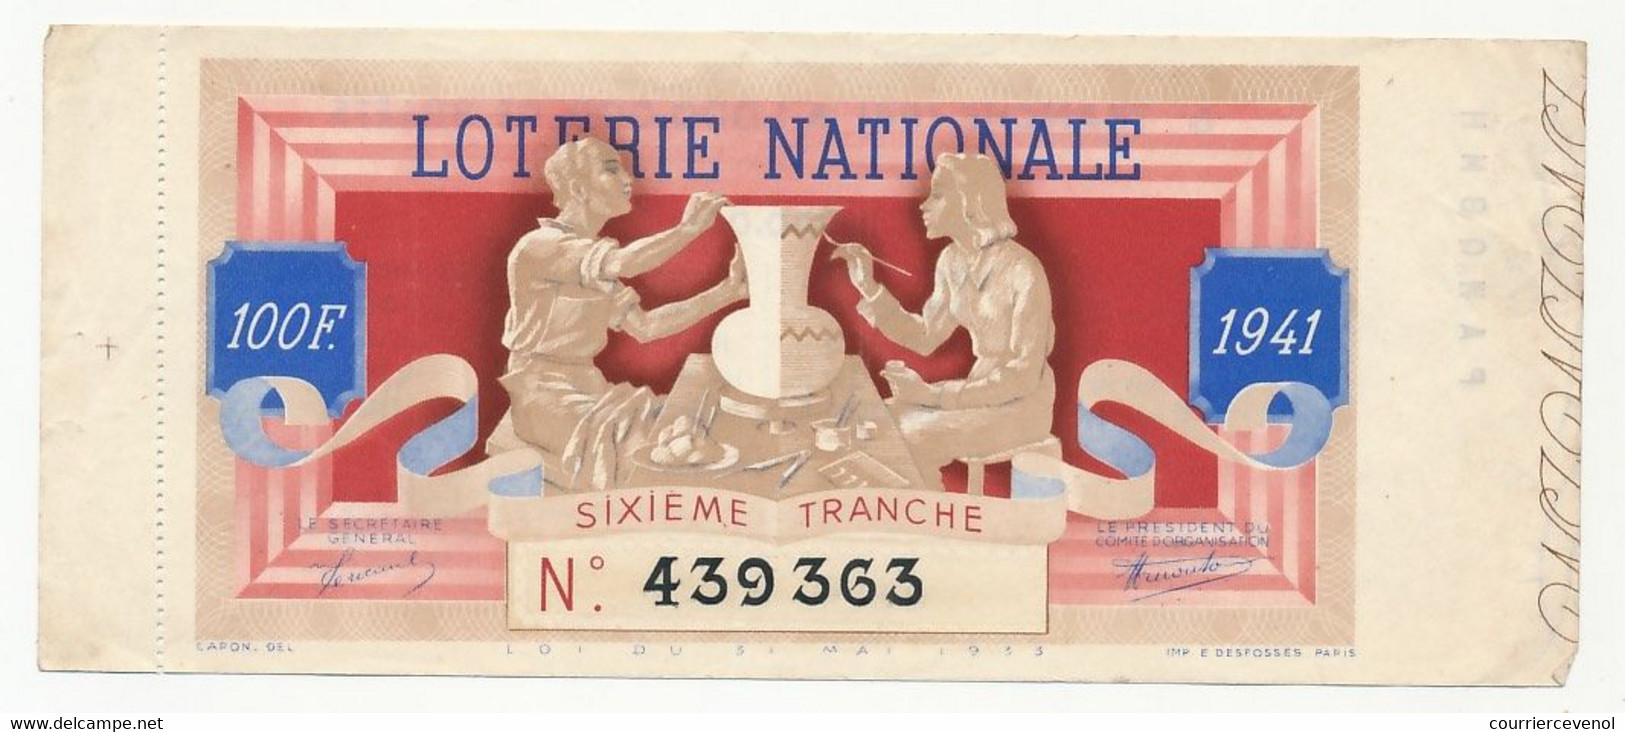 FRANCE - Loterie Nationale - Billet Entier - 6eme Tranche 1941 (Potiers) - Lottery Tickets